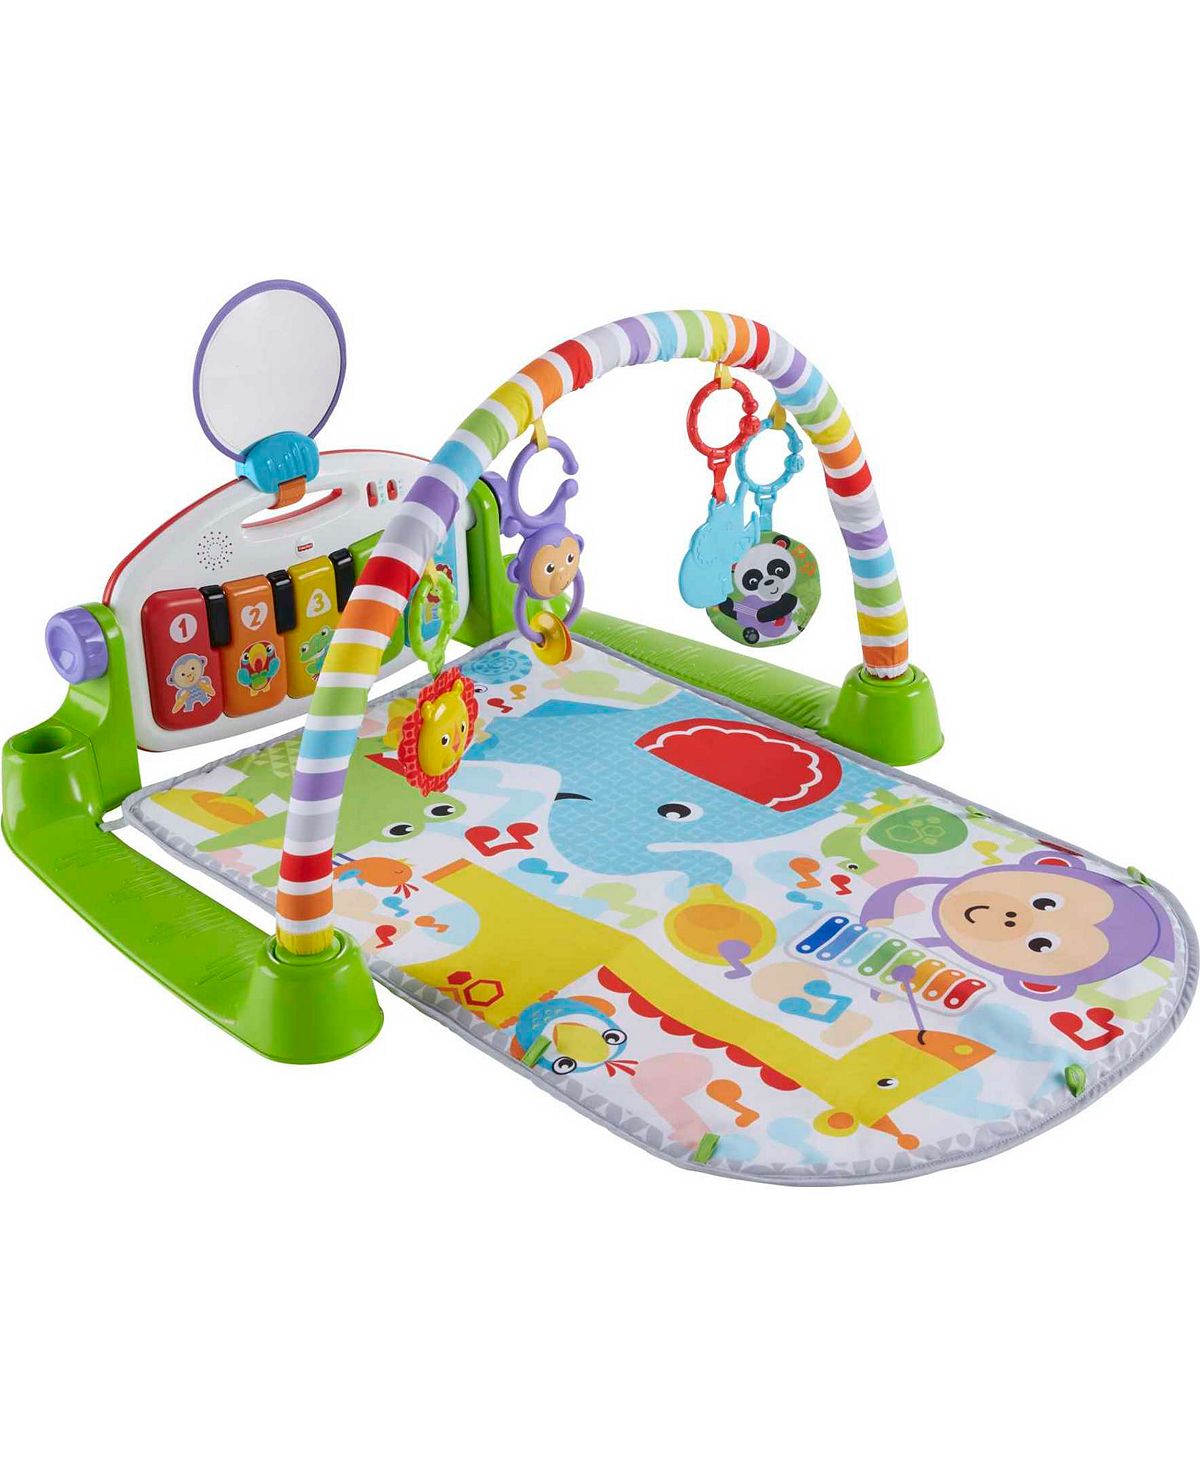 Fisher-Price Deluxe Kick & Play Piano Gym, Interactive Musical Toy for Newborns, Available in Green and Pink